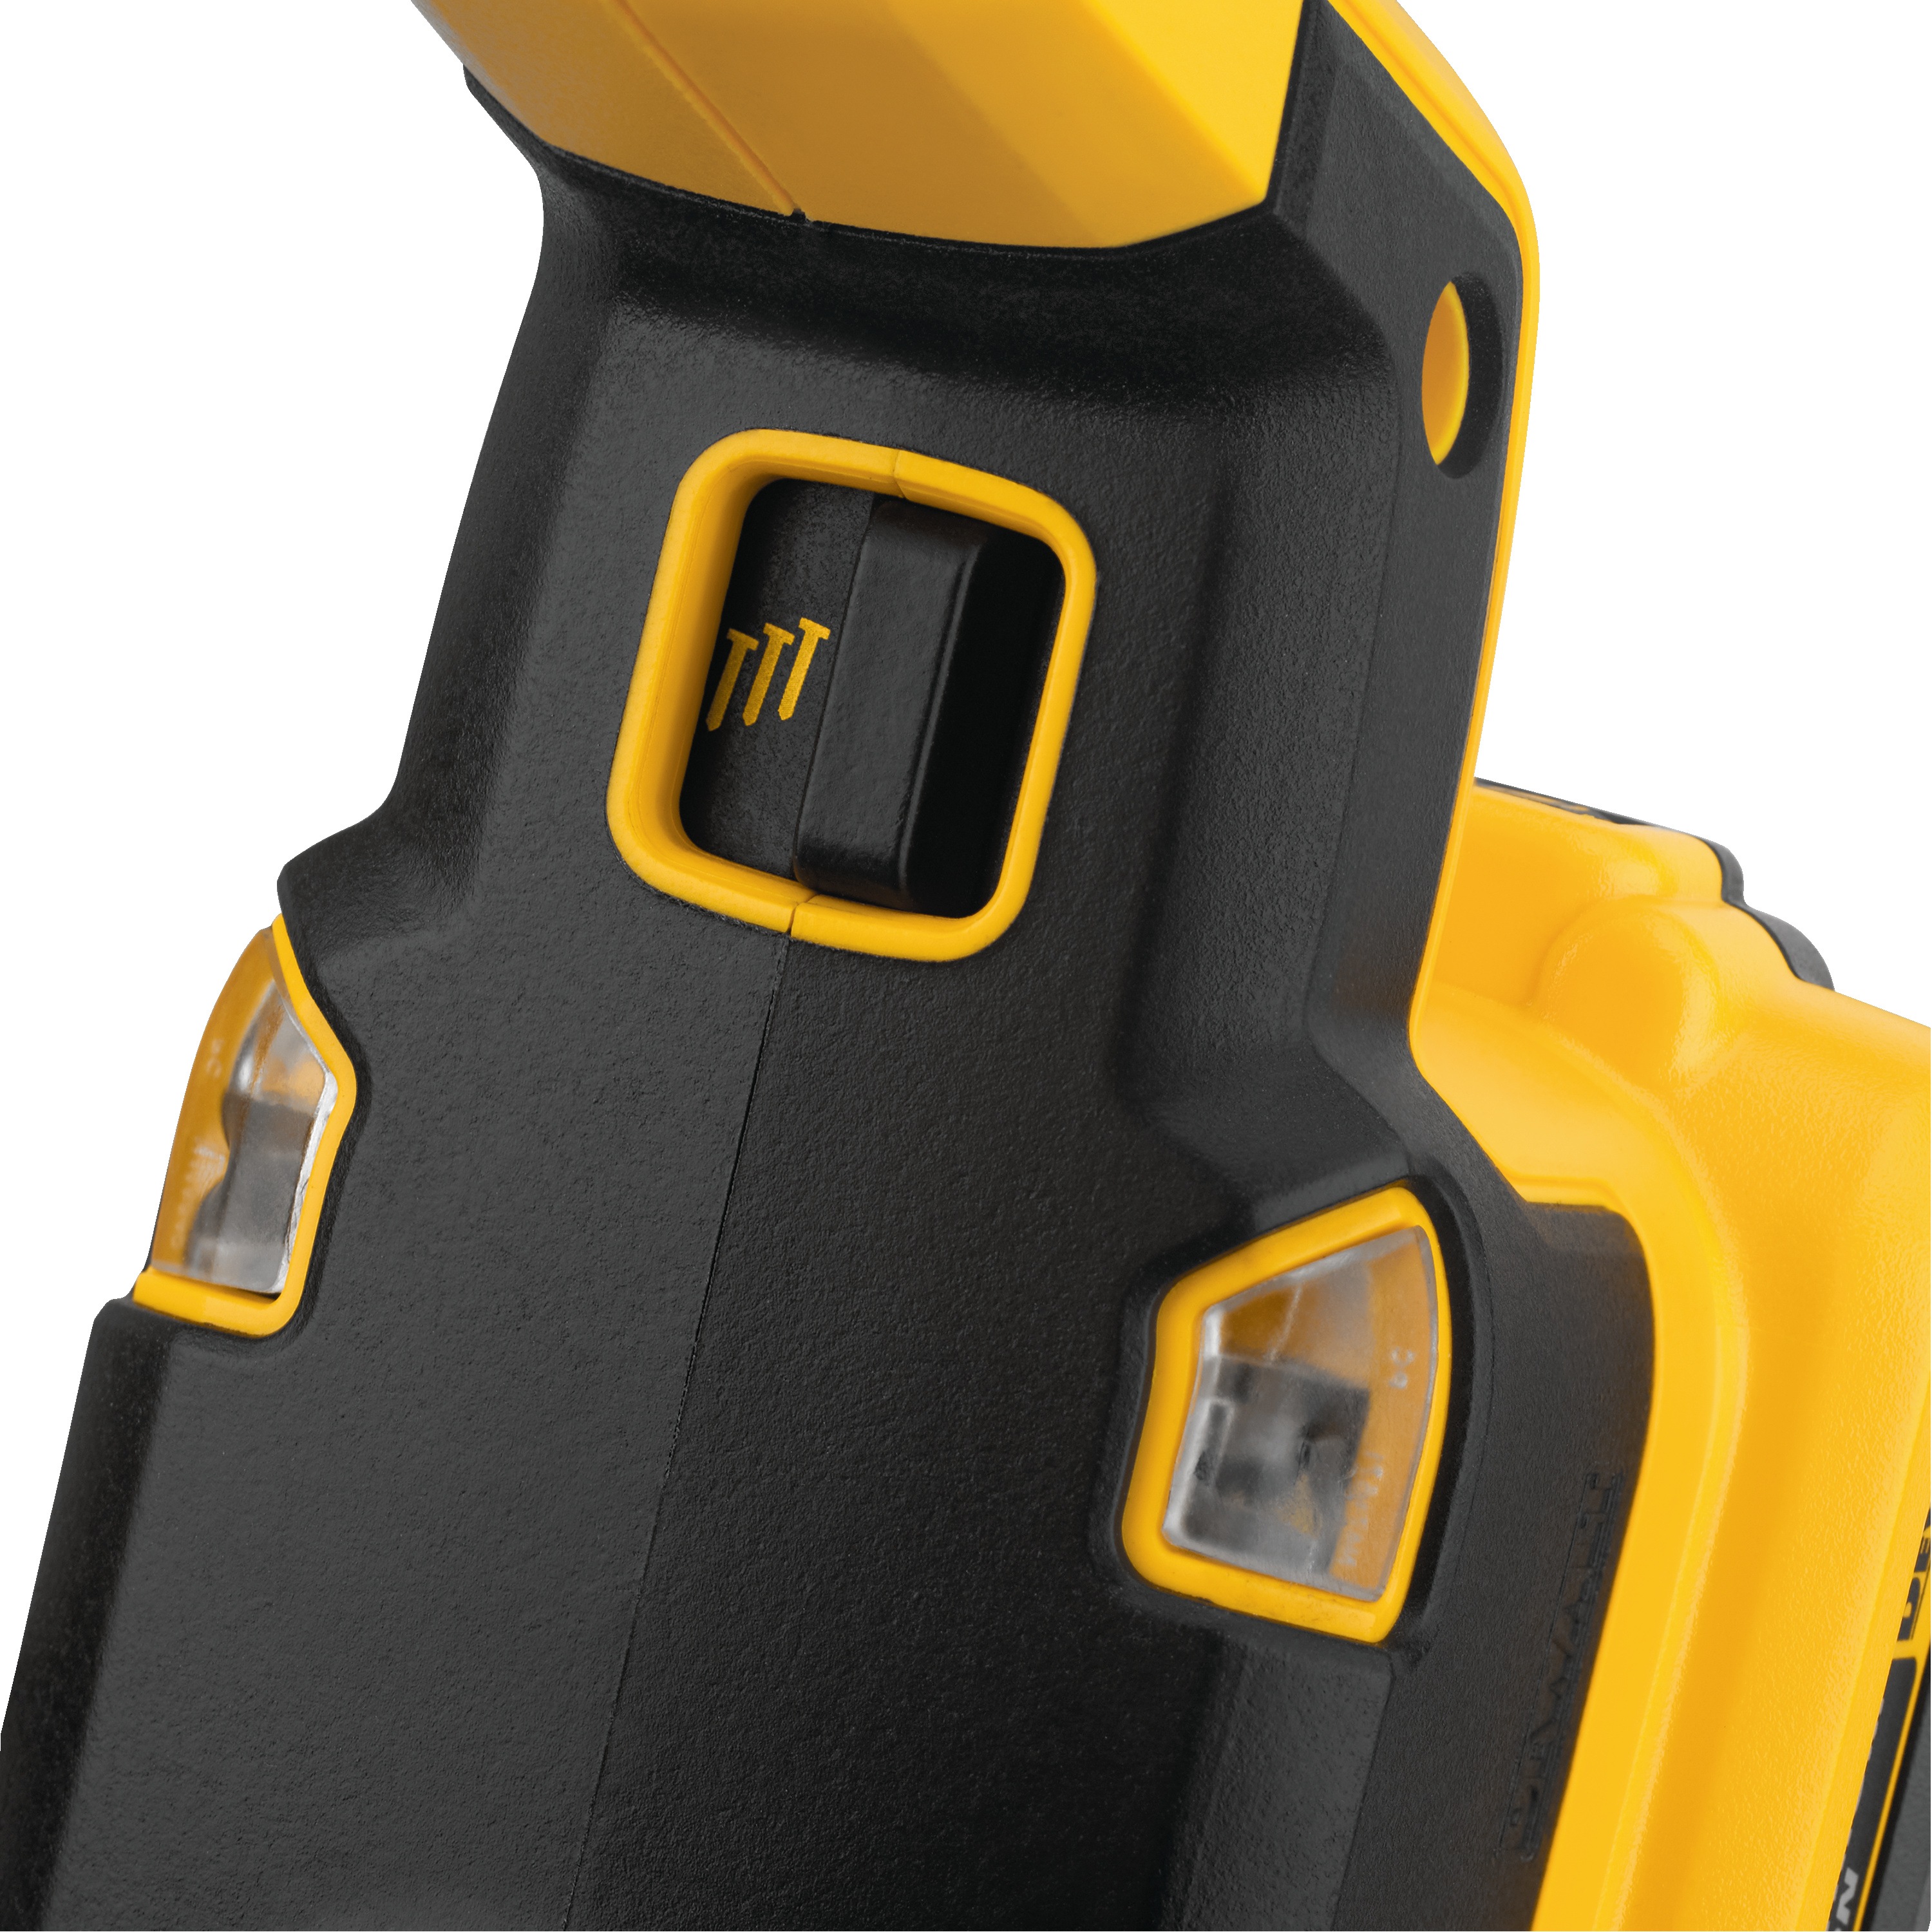 Close up of nail selection button feature of a  XR 18 gauge Cordless Narrow Crown Stapler